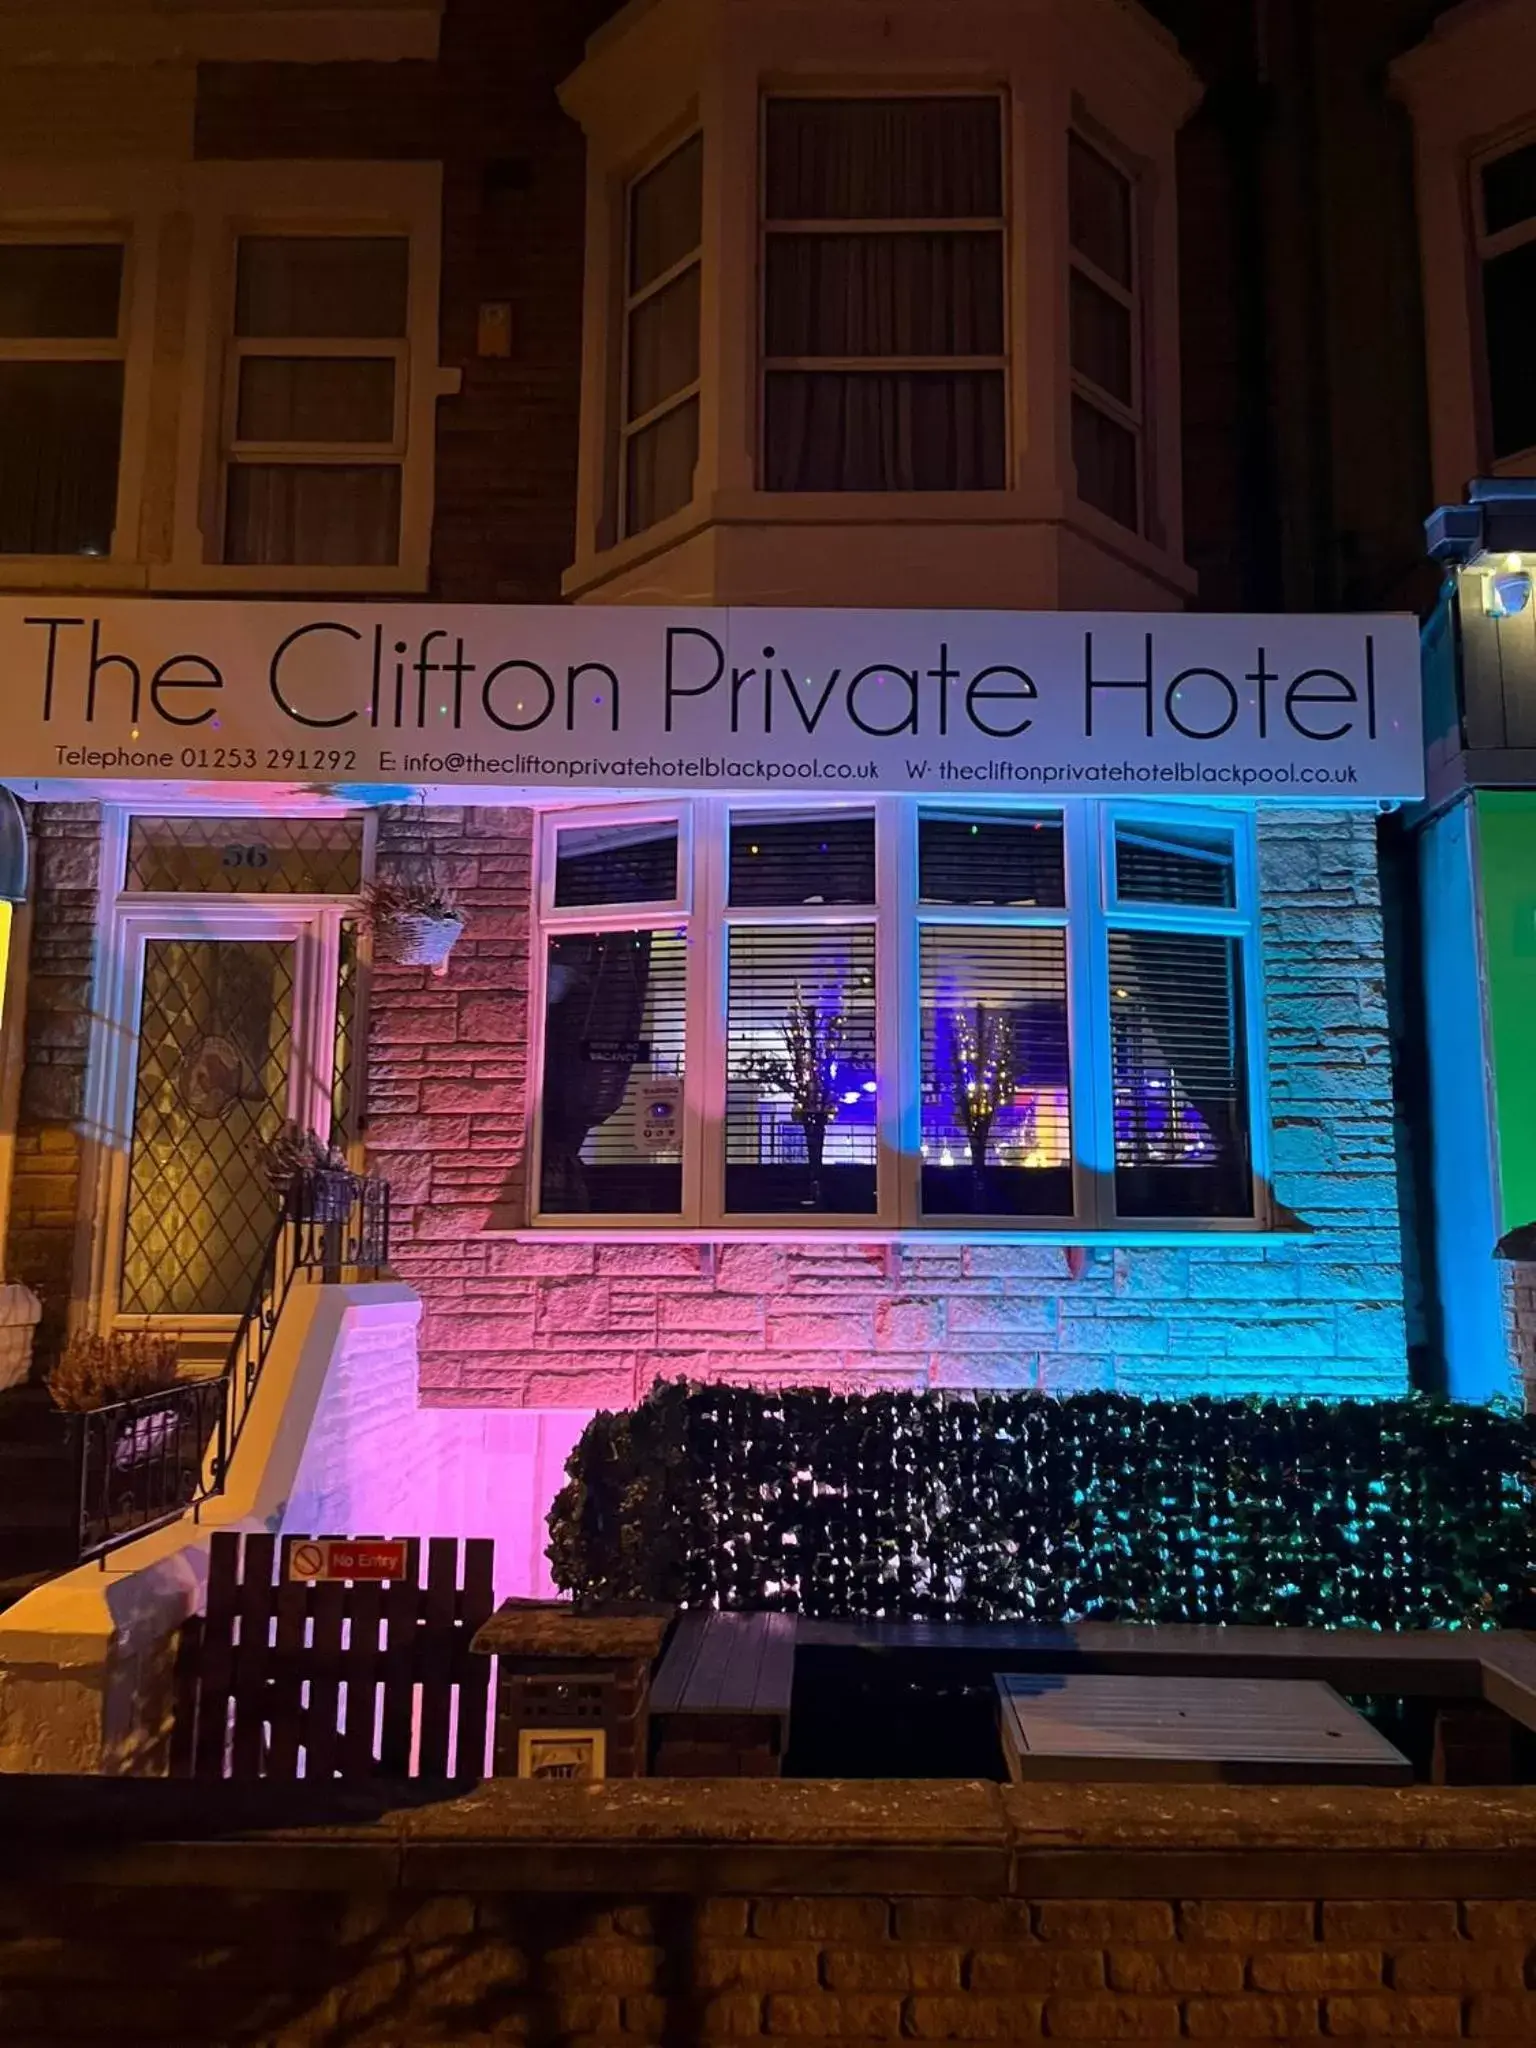 Property building in Clifton Private Hotel